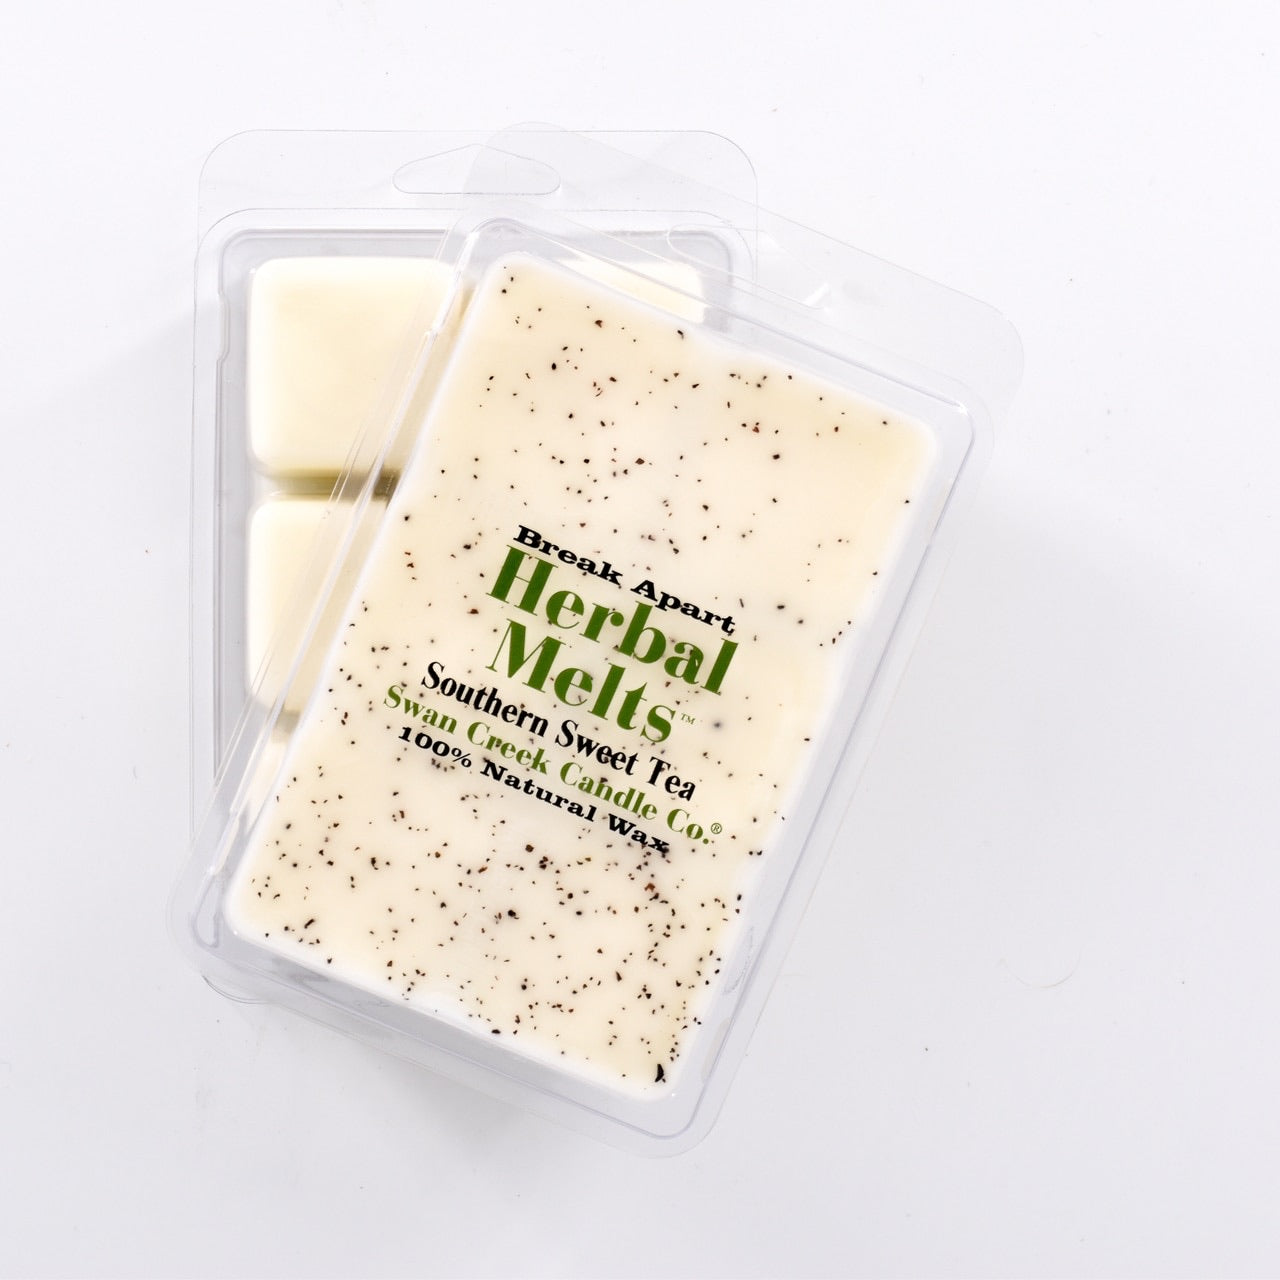 ivory colored wax with bits of black tea sprinkled on top in packaging with another package showing the bottom of the wax melts break apart design.